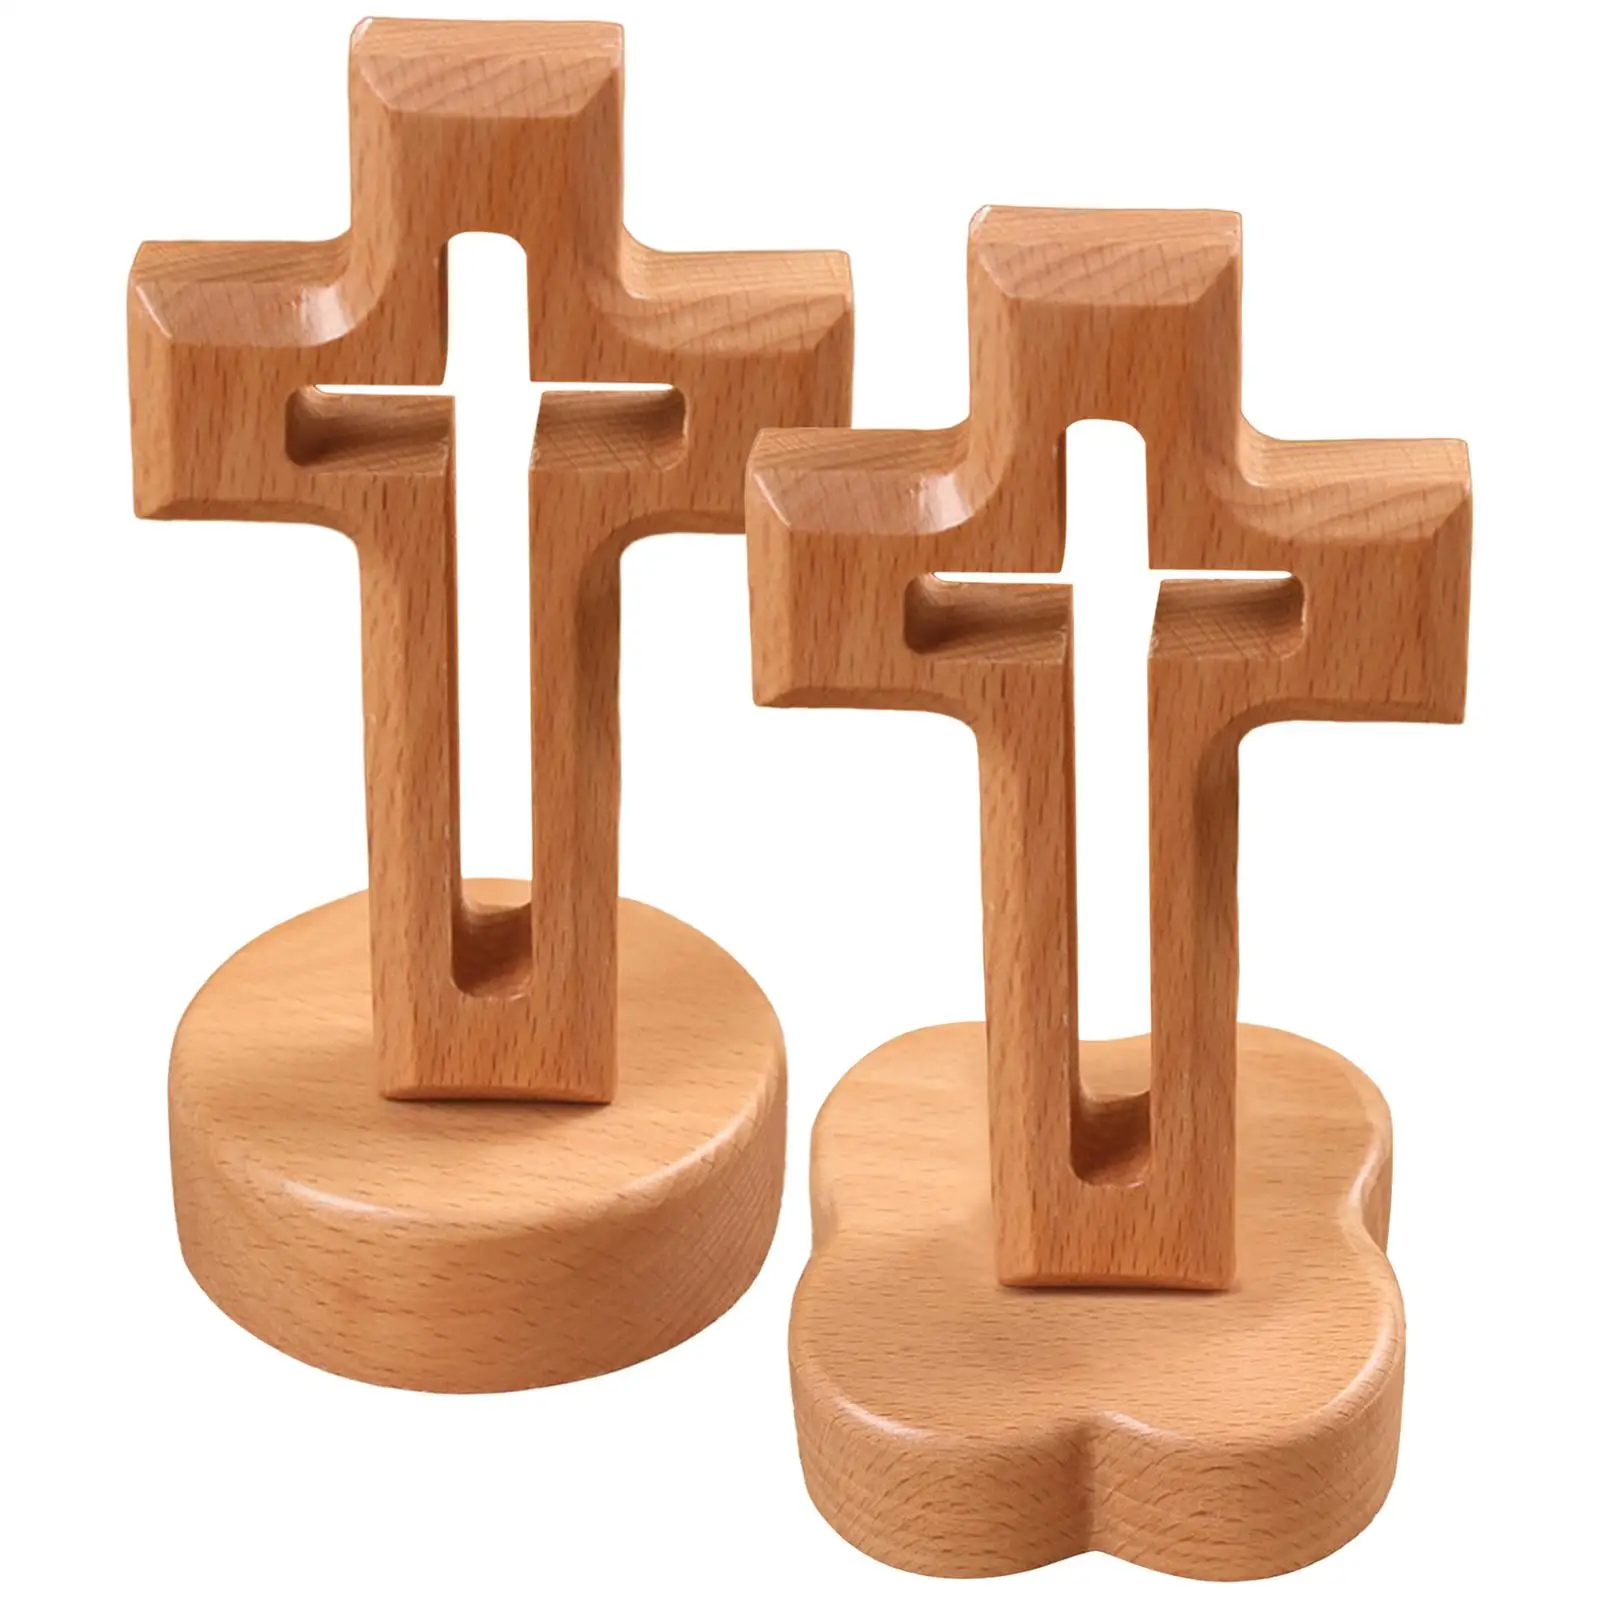 Wooden Cross Ornament Christian Gifts Standing Collection Crucifix for Church Study Living Room Bedroom Decorative Accessories